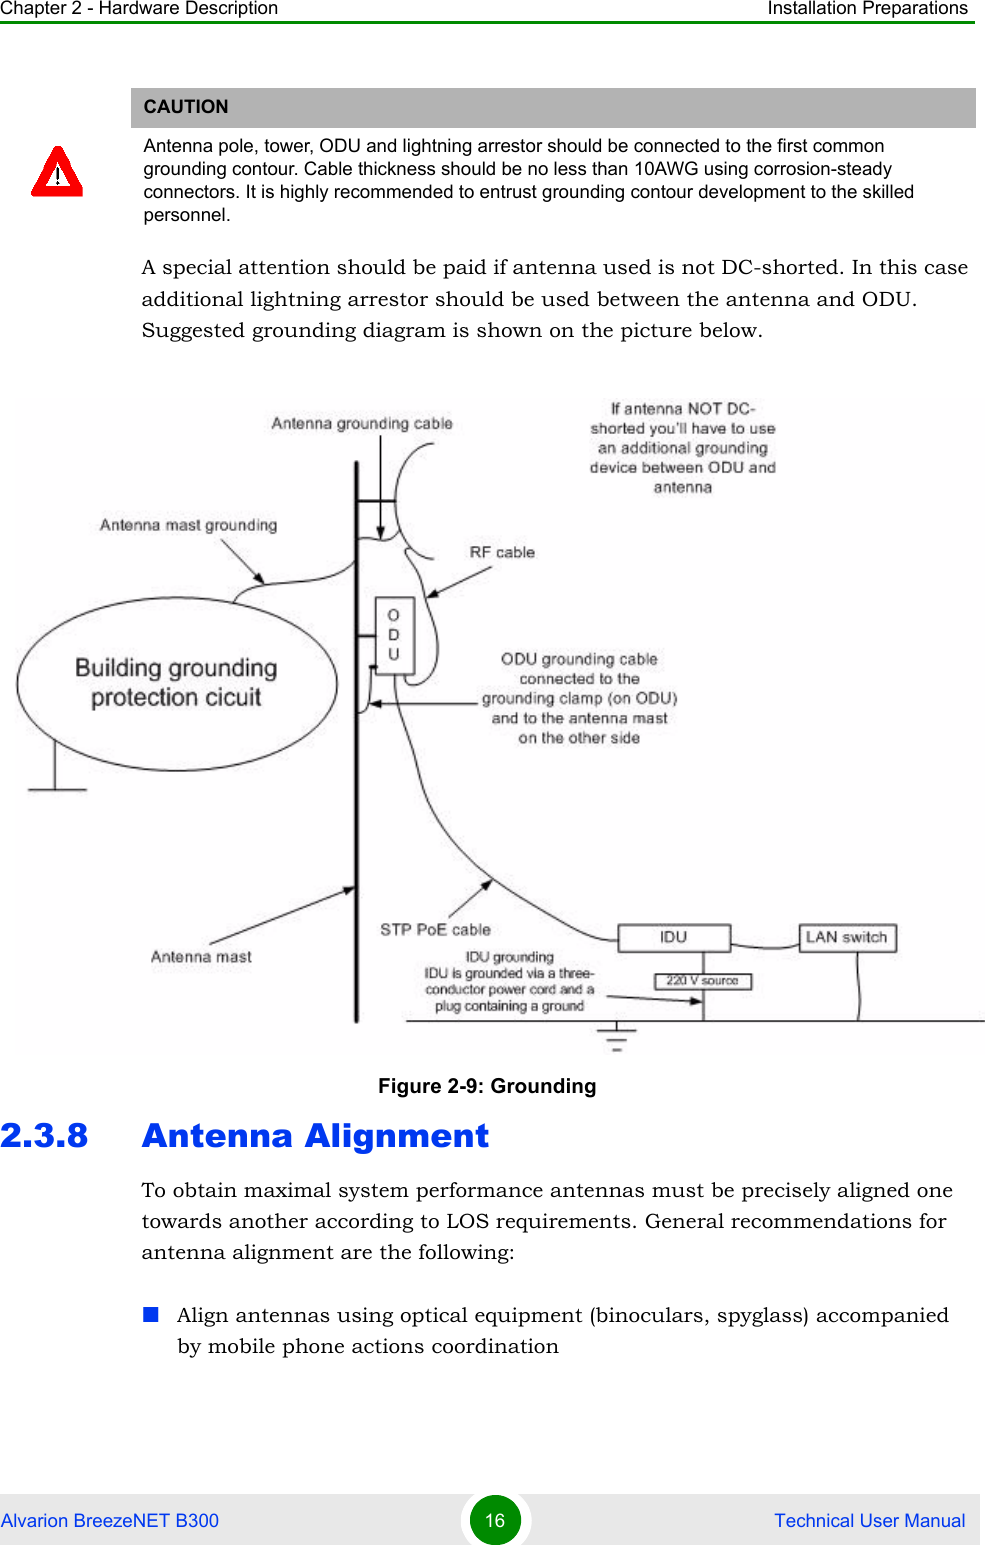 Chapter 2 - Hardware Description Installation PreparationsAlvarion BreezeNET B300 16  Technical User ManualA special attention should be paid if antenna used is not DC-shorted. In this case additional lightning arrestor should be used between the antenna and ODU. Suggested grounding diagram is shown on the picture below.2.3.8 Antenna AlignmentTo obtain maximal system performance antennas must be precisely aligned one towards another according to LOS requirements. General recommendations for antenna alignment are the following:Align antennas using optical equipment (binoculars, spyglass) accompanied by mobile phone actions coordinationCAUTIONAntenna pole, tower, ODU and lightning arrestor should be connected to the first common grounding contour. Cable thickness should be no less than 10AWG using corrosion-steady connectors. It is highly recommended to entrust grounding contour development to the skilled personnel.Figure 2-9: Grounding